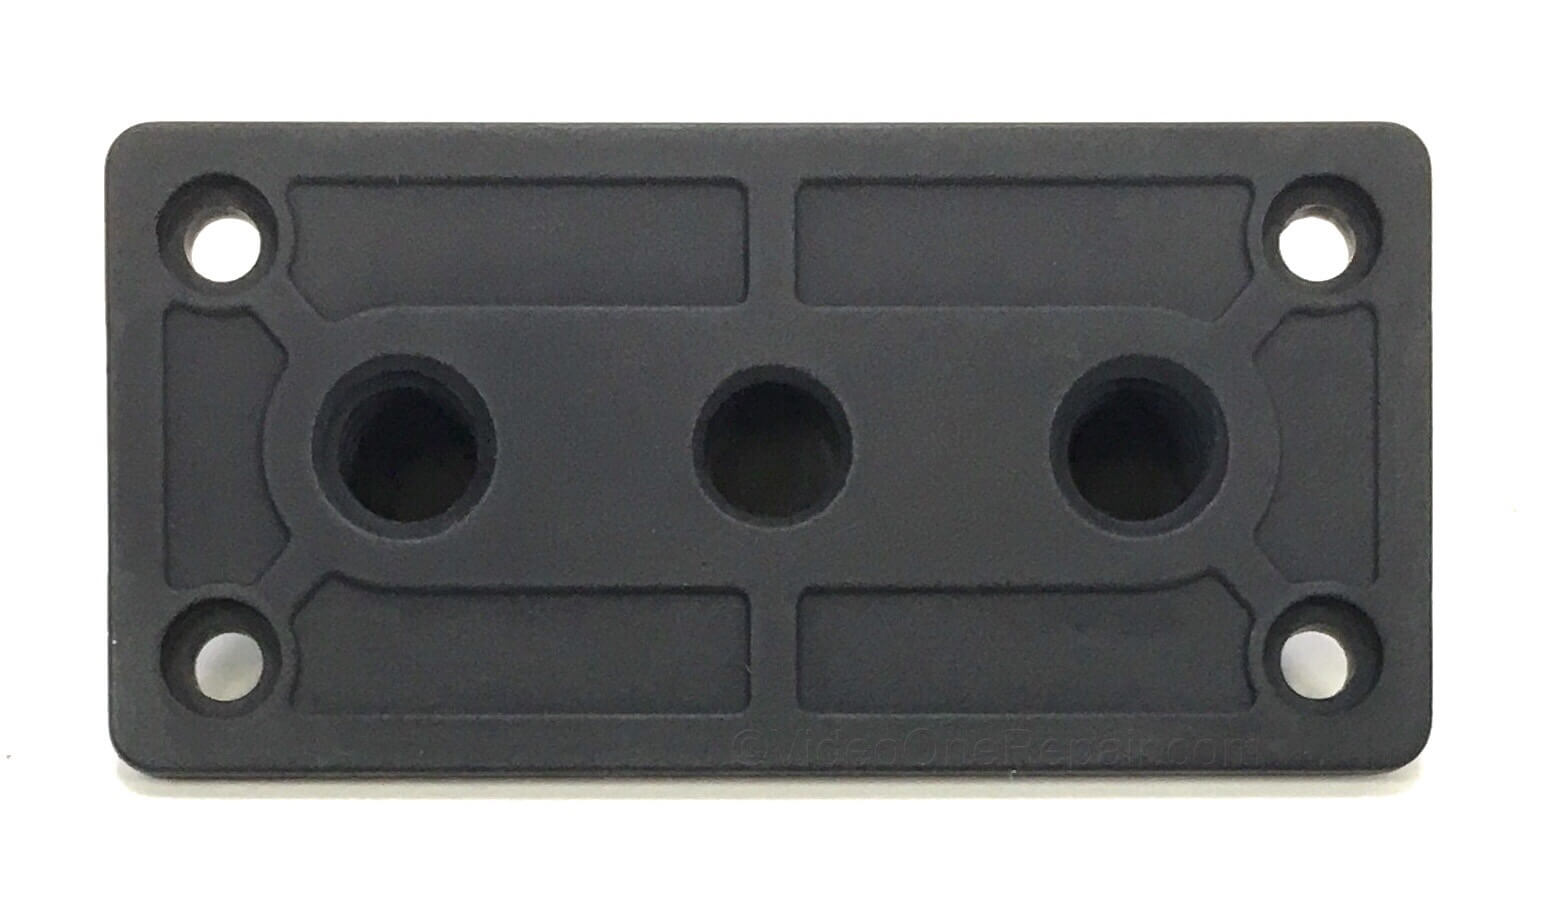 Original Tripod Mount Screw Plate that fits on the Sony NEX-FS100 camcorder. It is a genuine Sony part, sourced directly from Sony USA. Brand new factory fresh. Free Shipping.